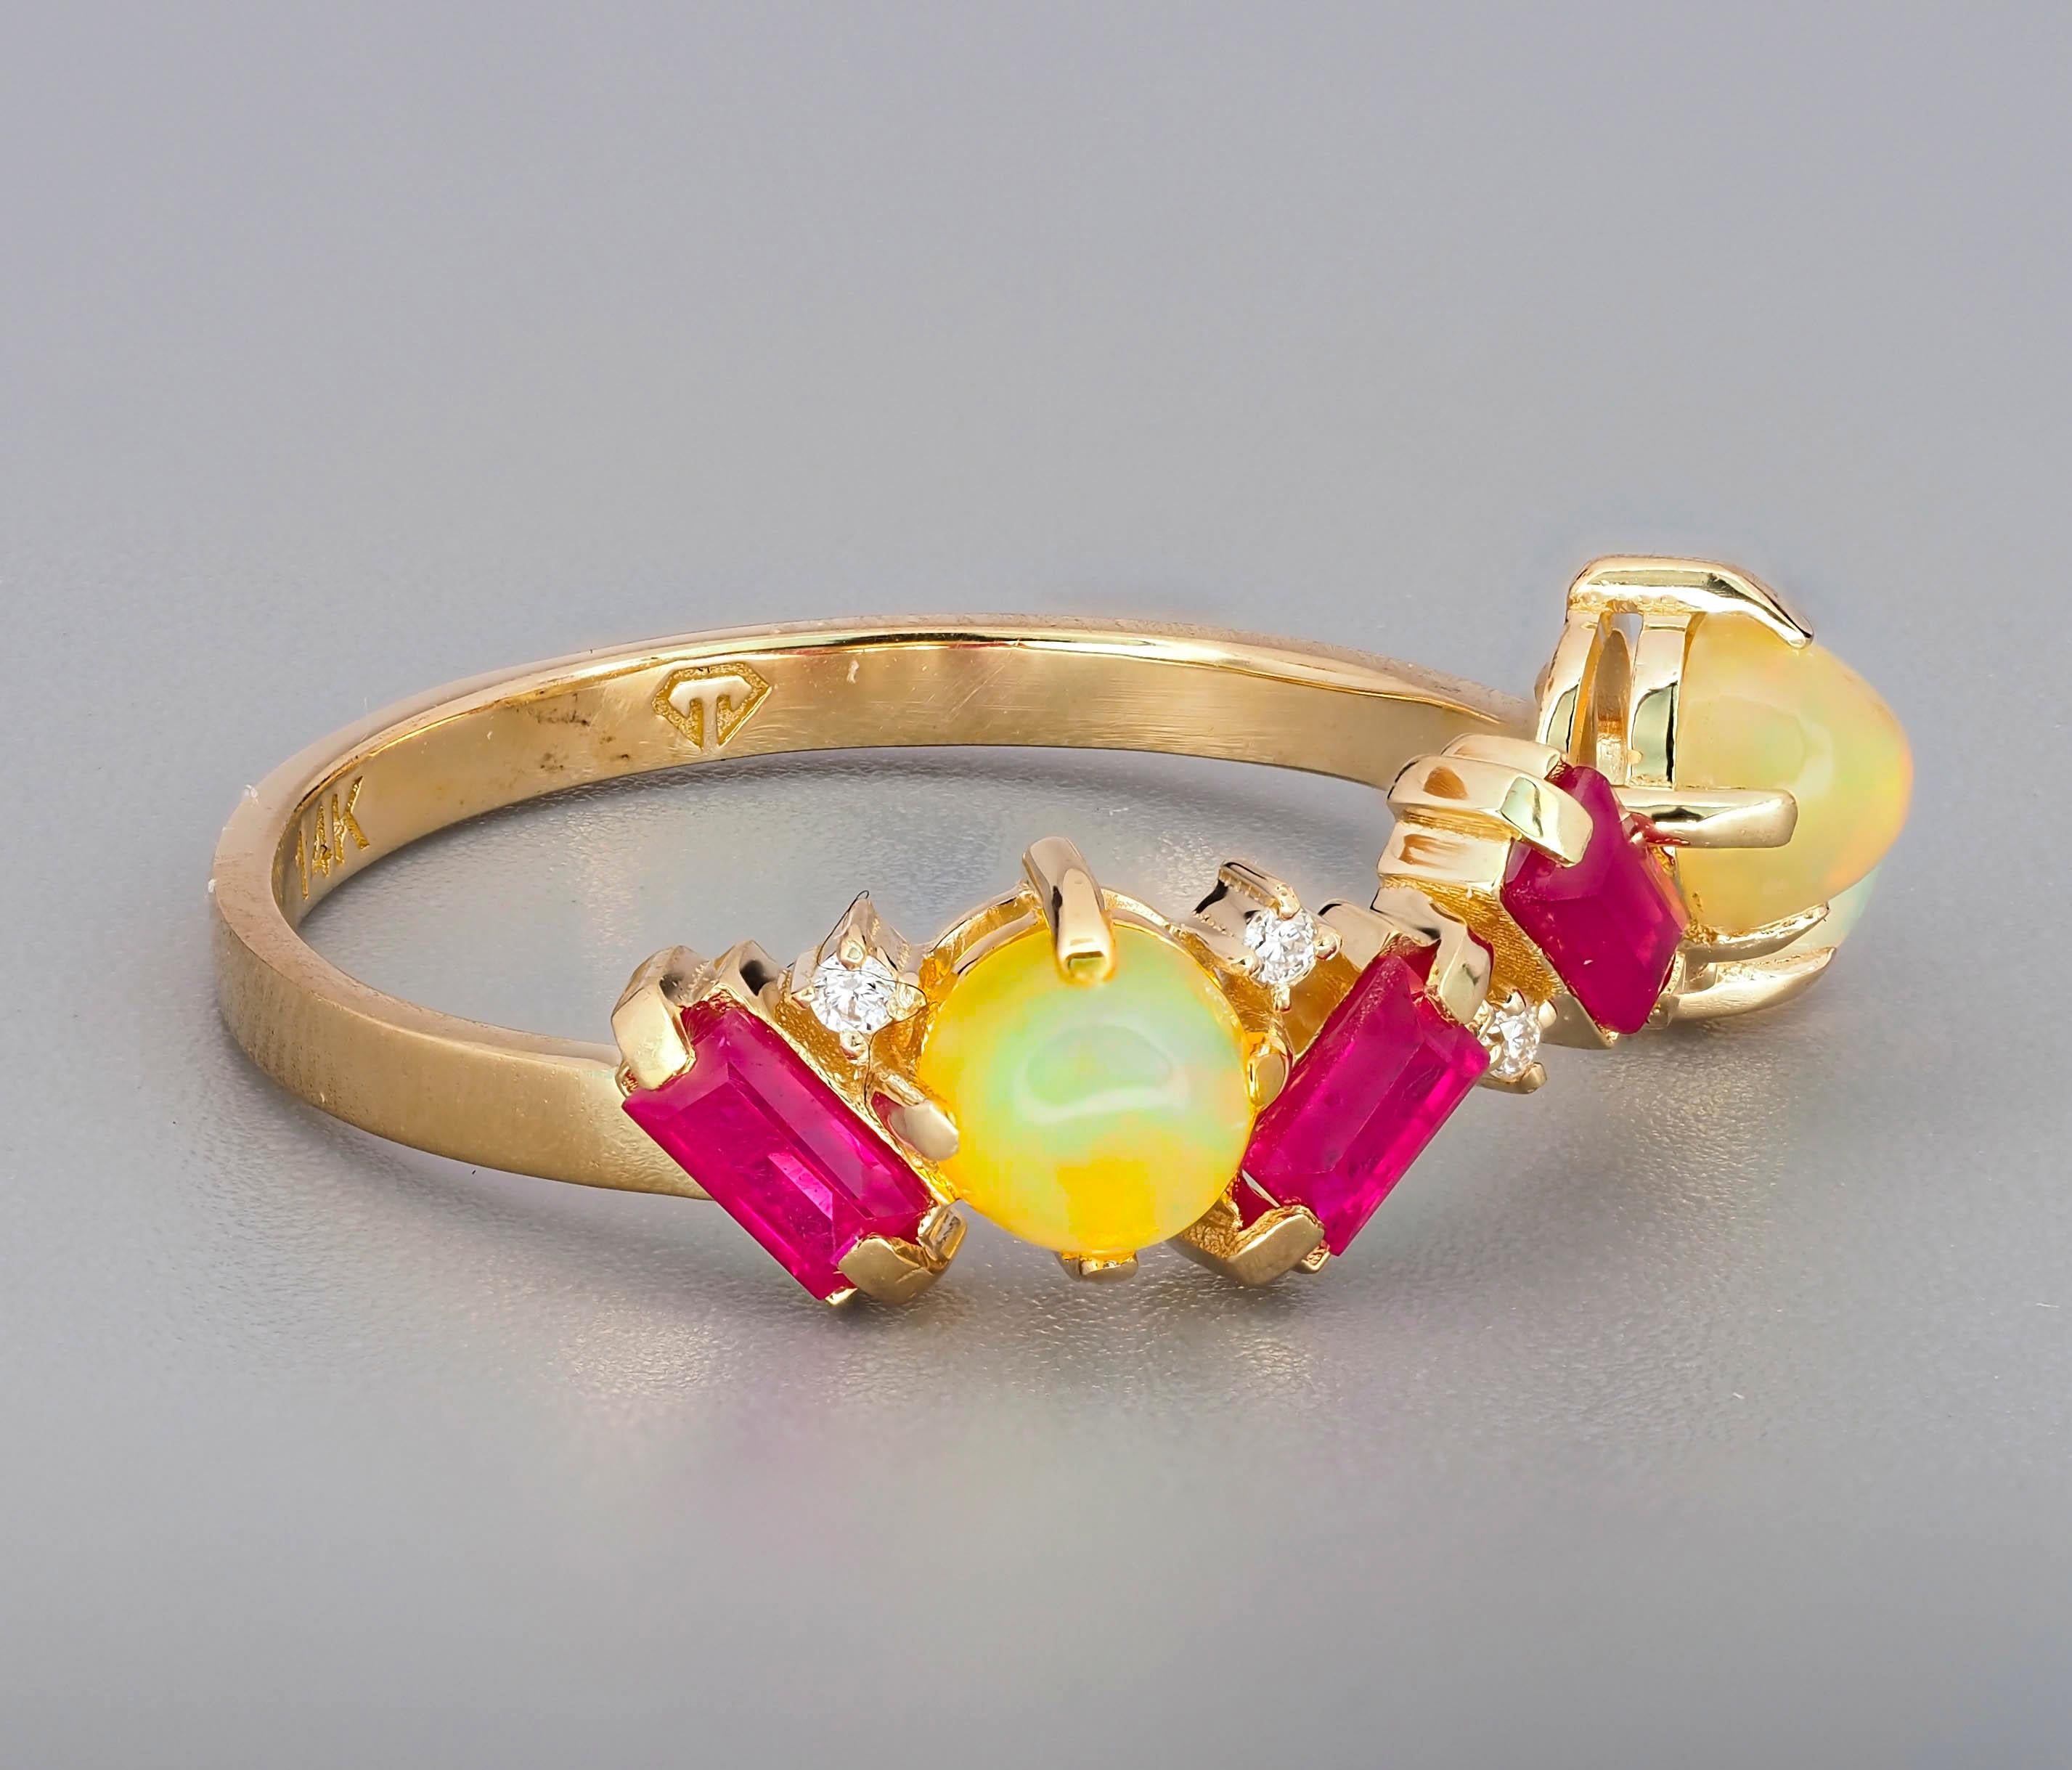 For Sale:  14k Gold Ring with Rubies, Diamonds and Opals! 2